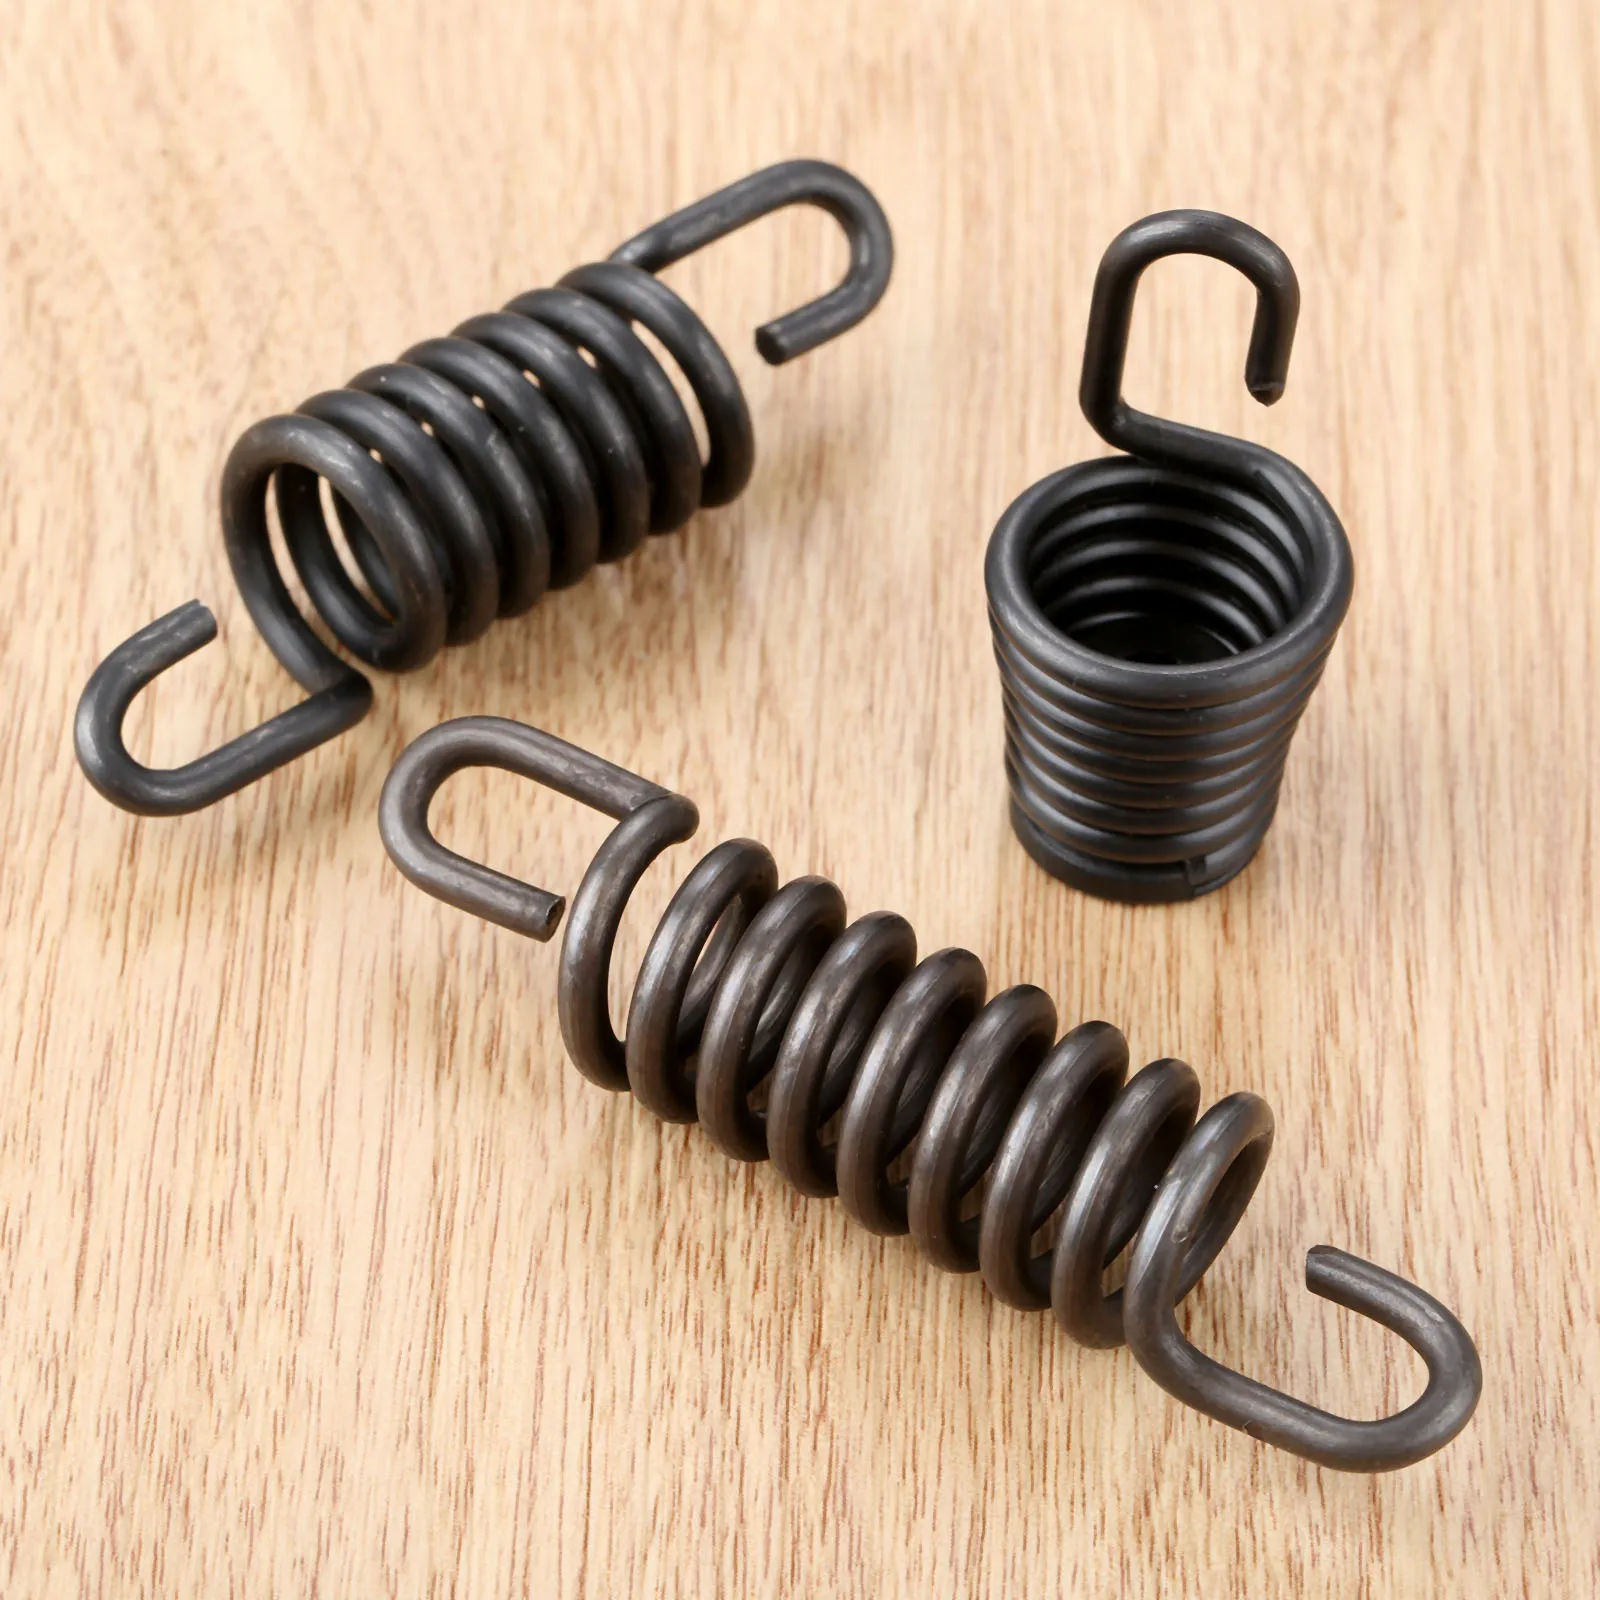 

3Pcs/set Chainsaw AV SPRING MOUNT SET TO P350 FIT FOR PARTNER CHAINSAW 350 351 370 371 390 420 Garden Power Tools